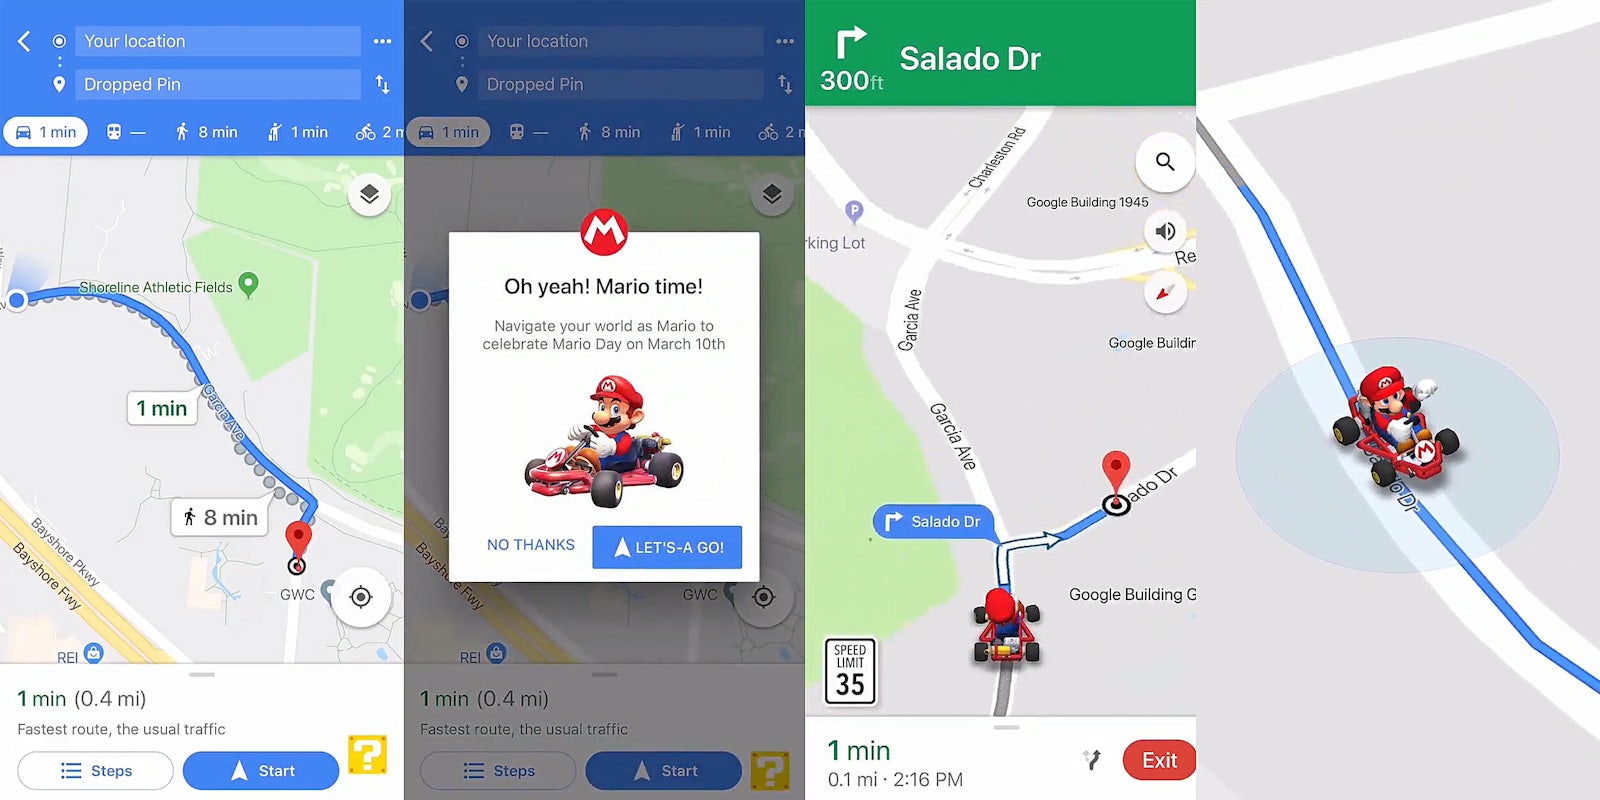 Mario in a go-kart on Google Maps